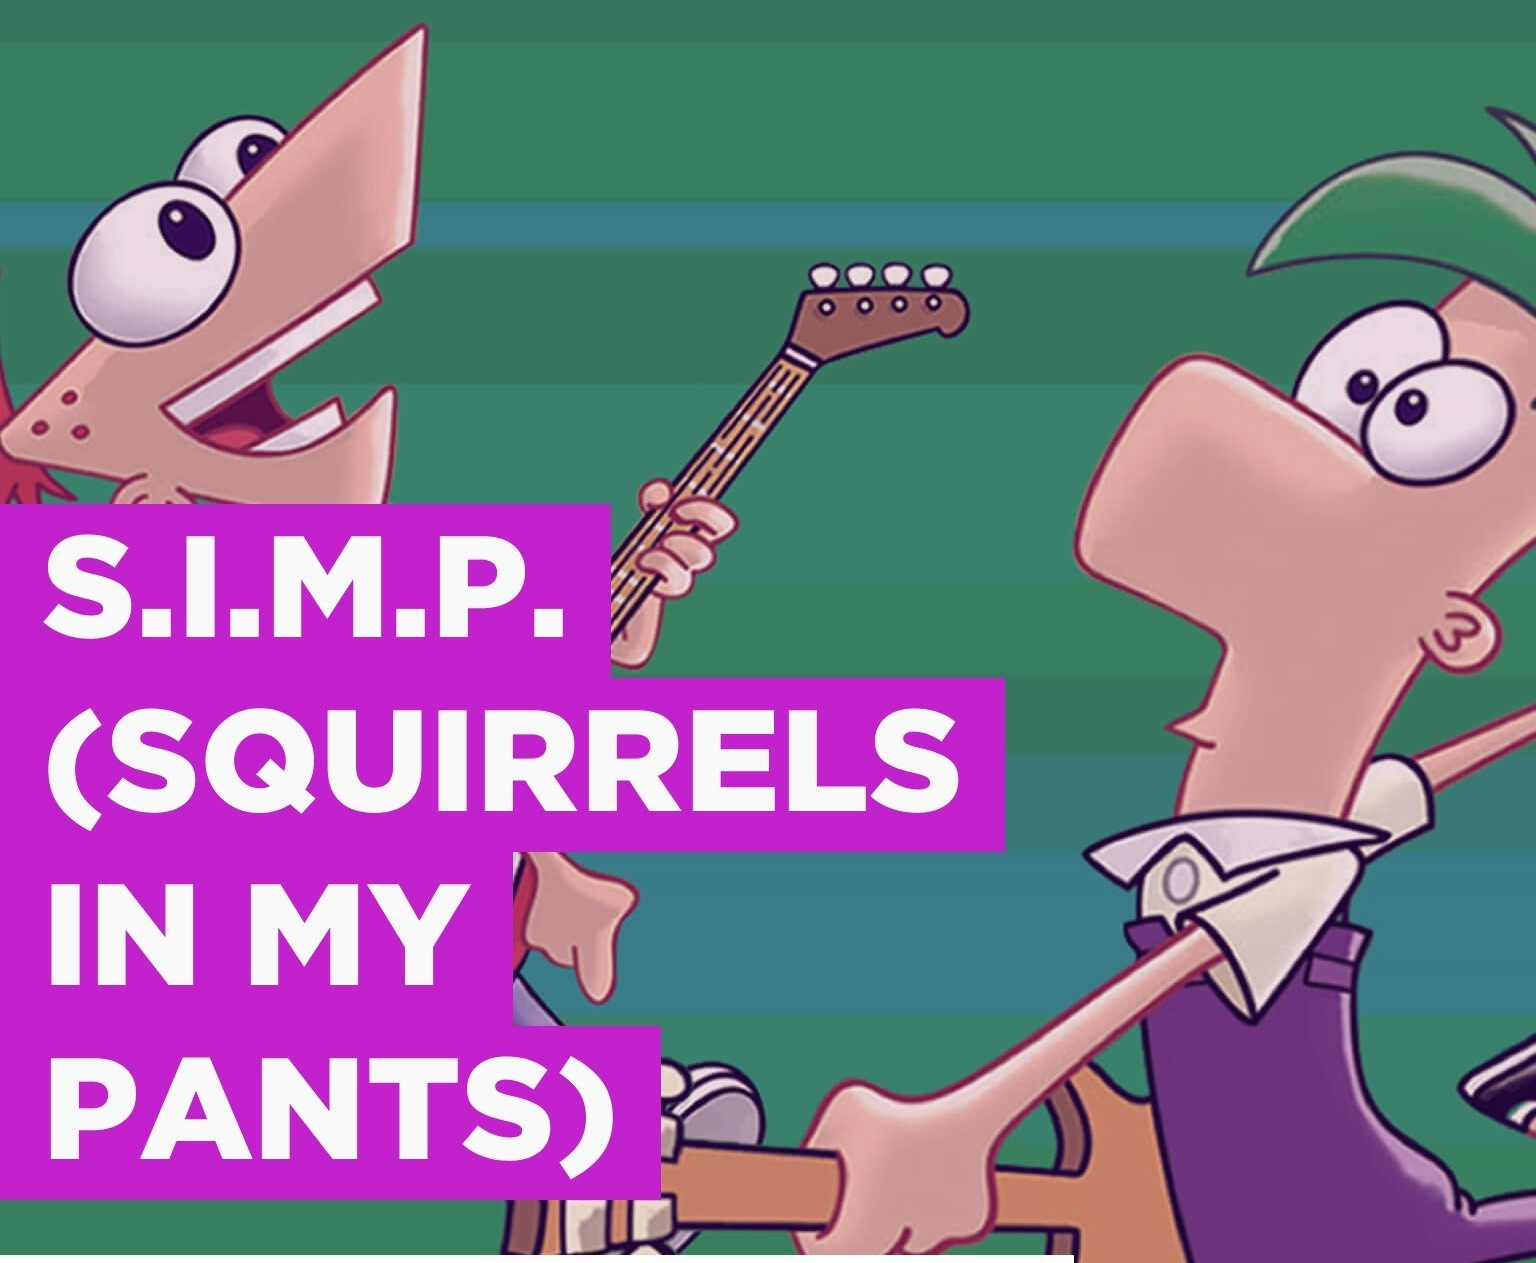 S.I.M.P (squirrels in my pants) Blank Meme Template